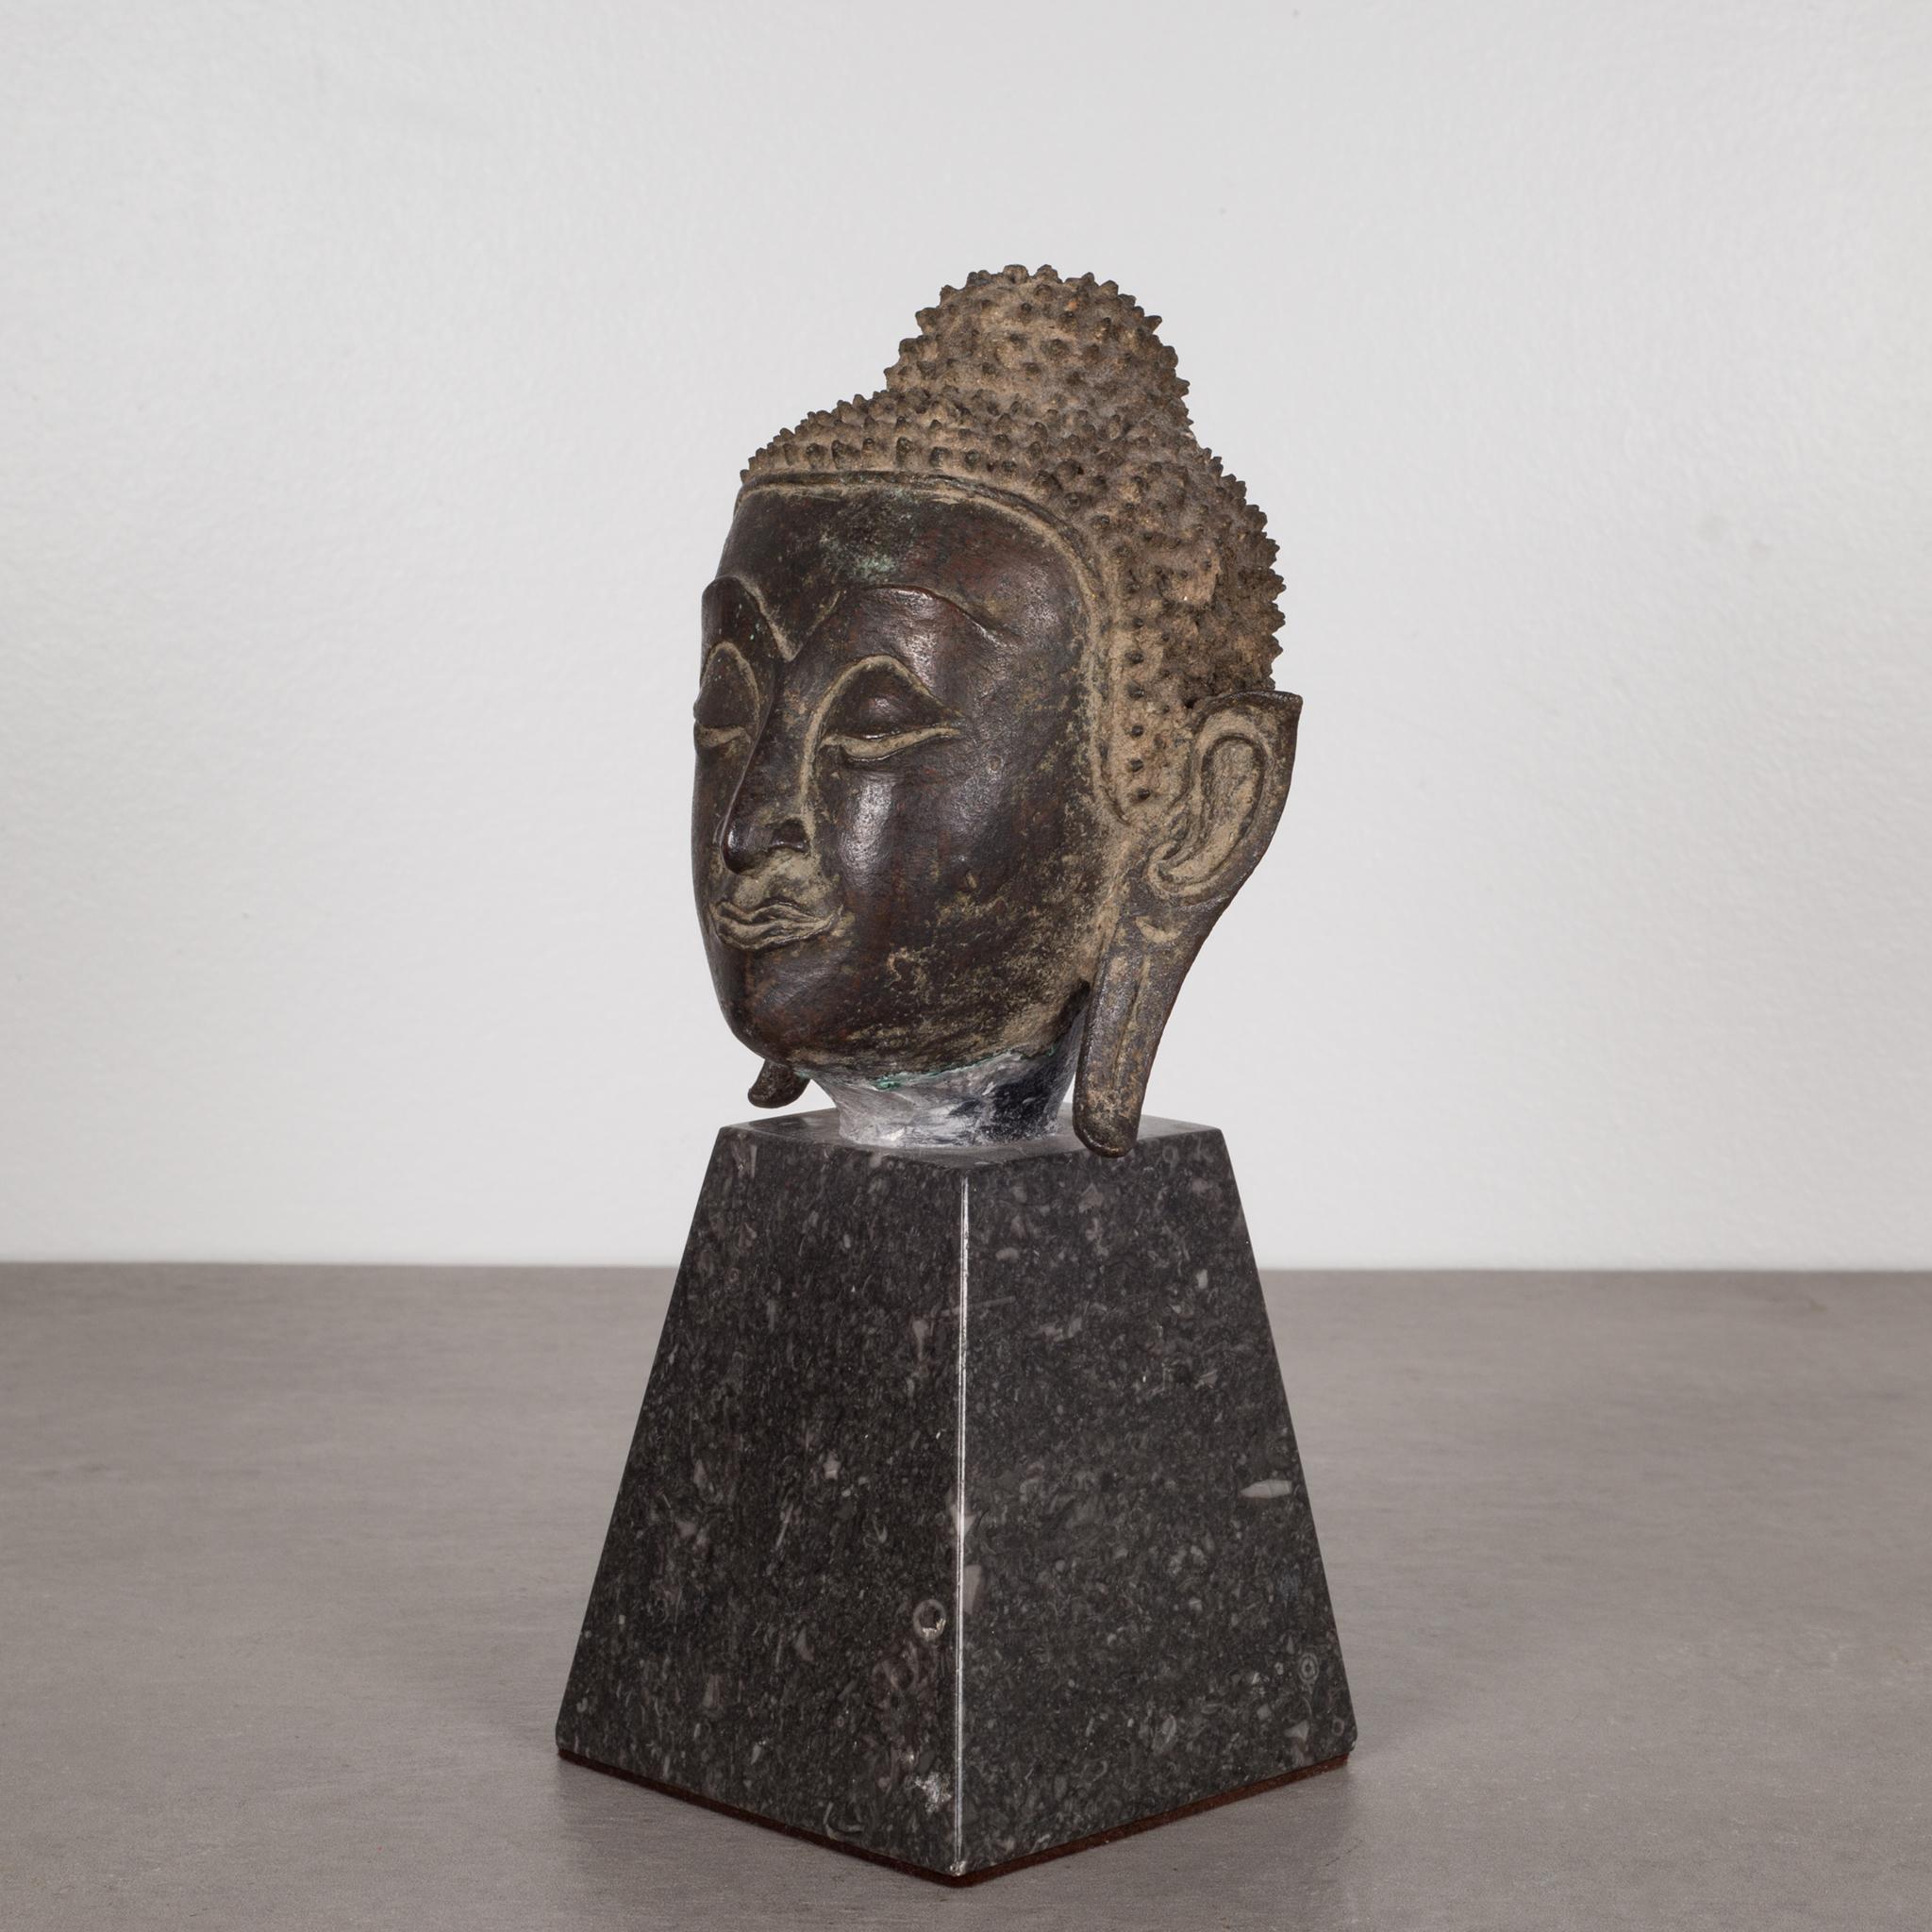 About:

This is an original lost-wax casting bronze head of Buddah Shakyamuni from the 19th century, Thailand. It is mounted on a contemporary marble base. His meditative expression, arched eyebrows, downcast eyes, smiling lips, elongated earlobes